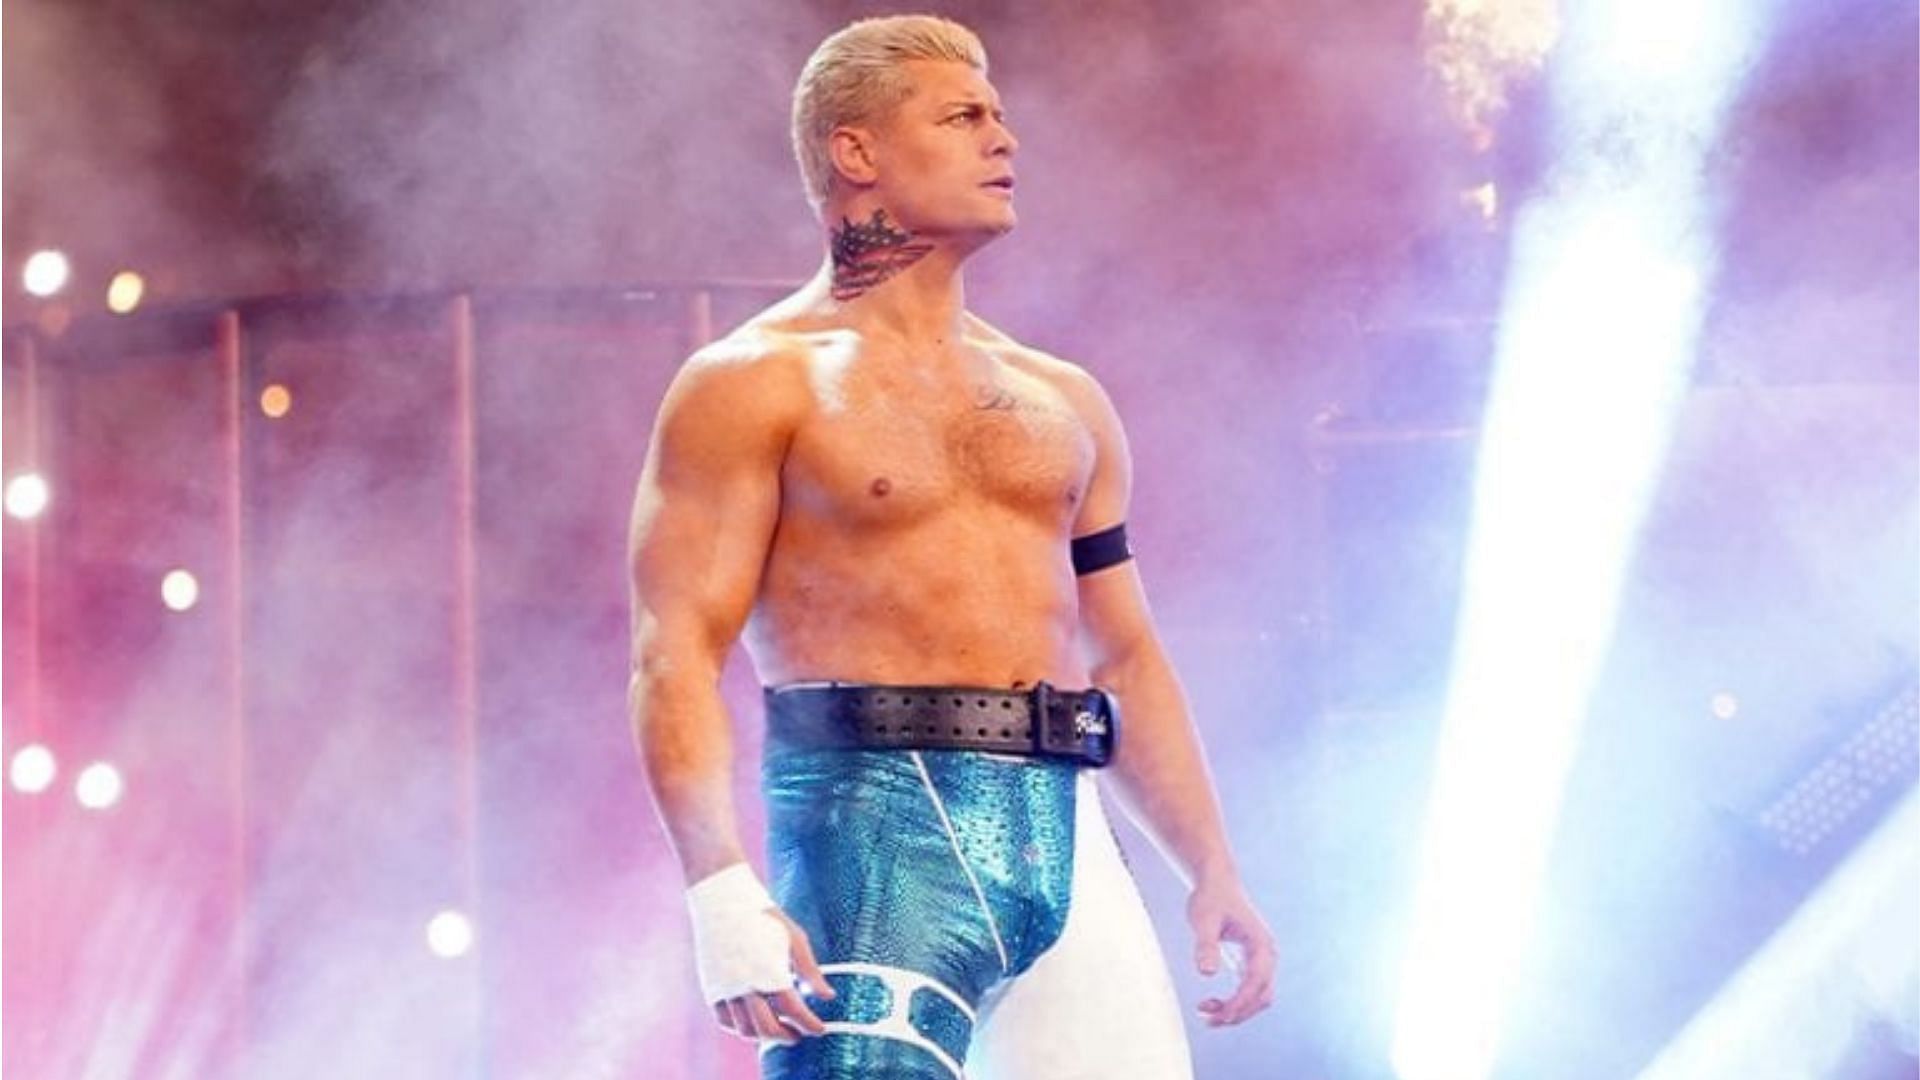 Big update on Cody Rhodes joining WWE